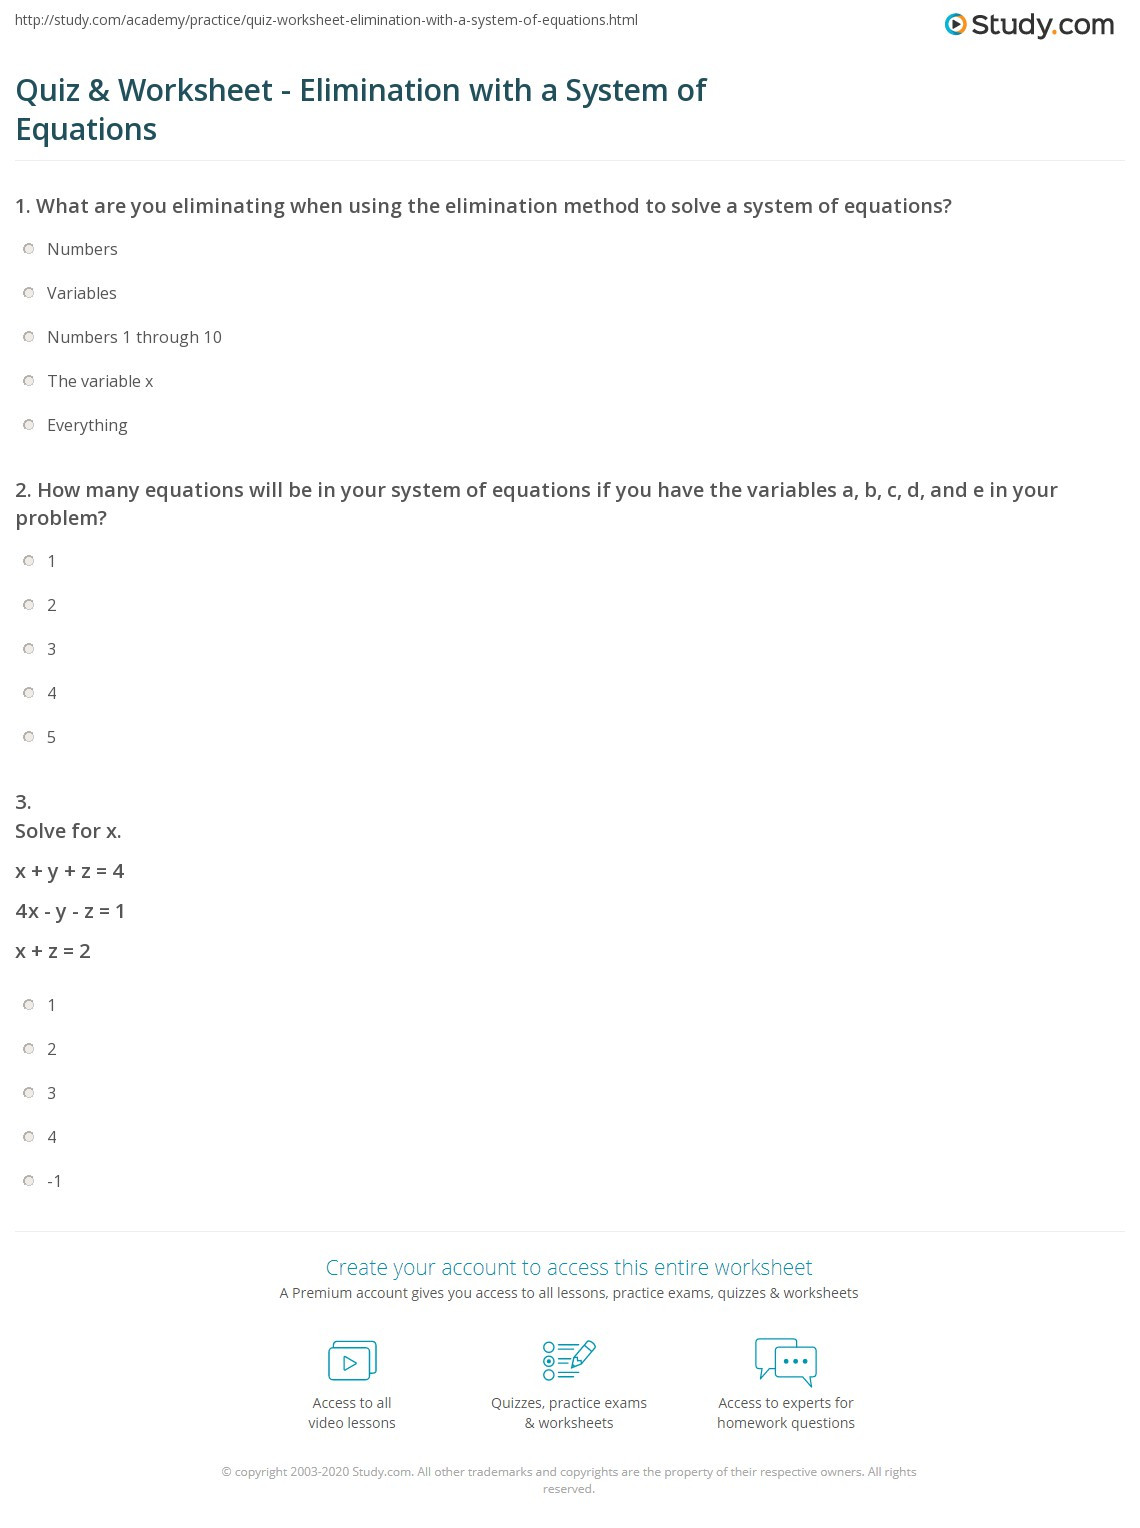 Systems Of Equations Review Worksheet Quiz &amp; Worksheet Elimination with A System Of Equations